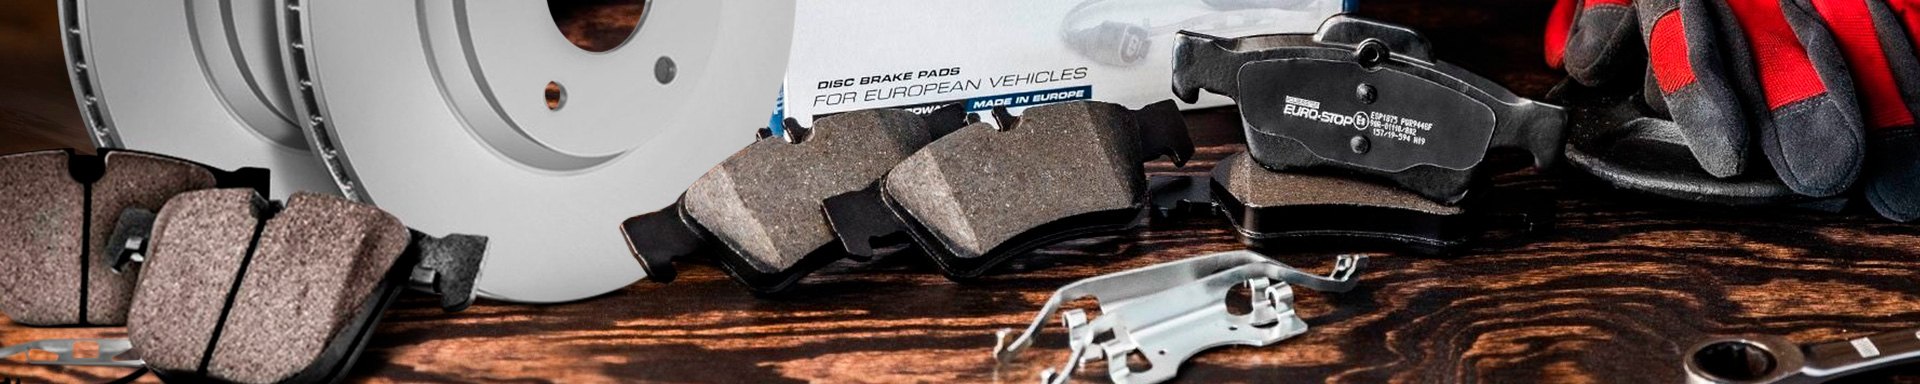 Meet All-New Series Of Premium Quality Brake Kits by Power Stop